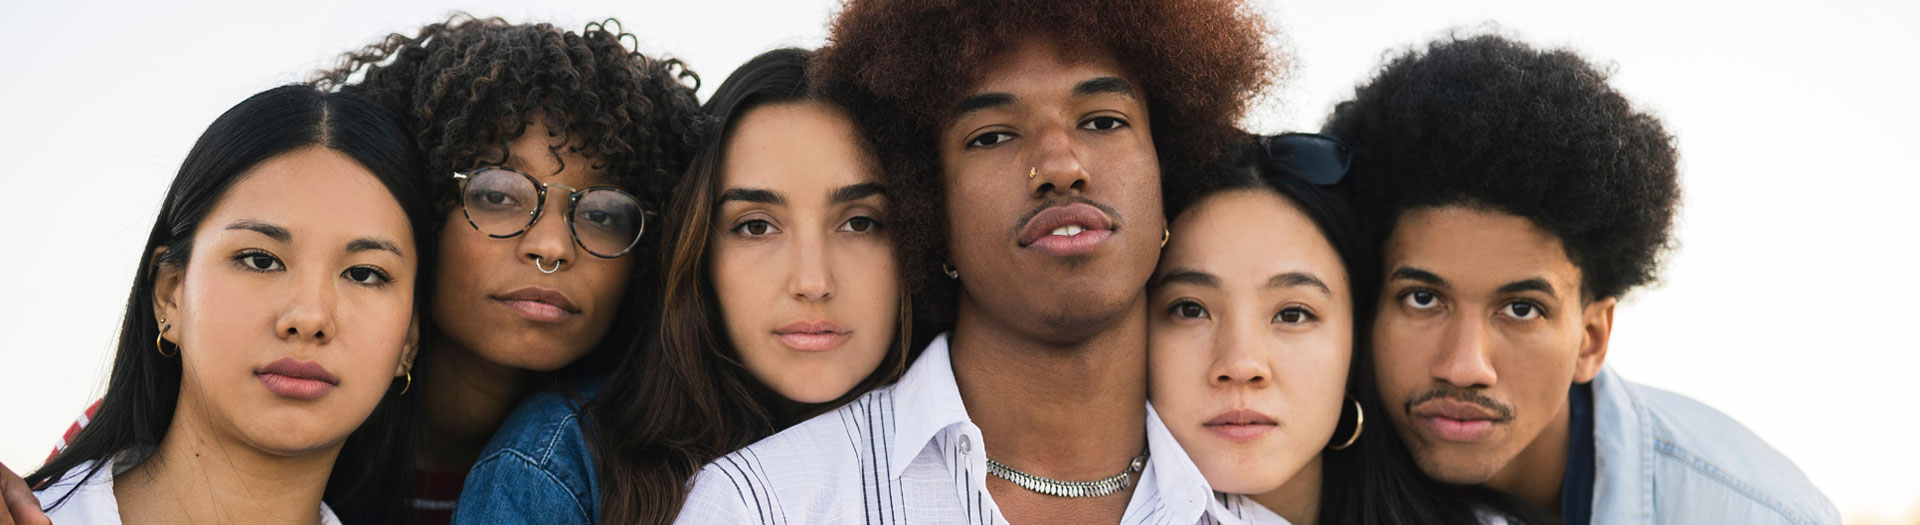 A close-up of a diverse group of five young people with different hairstyles and features, standing shoulder to shoulder and facing the camera against a clear sky.